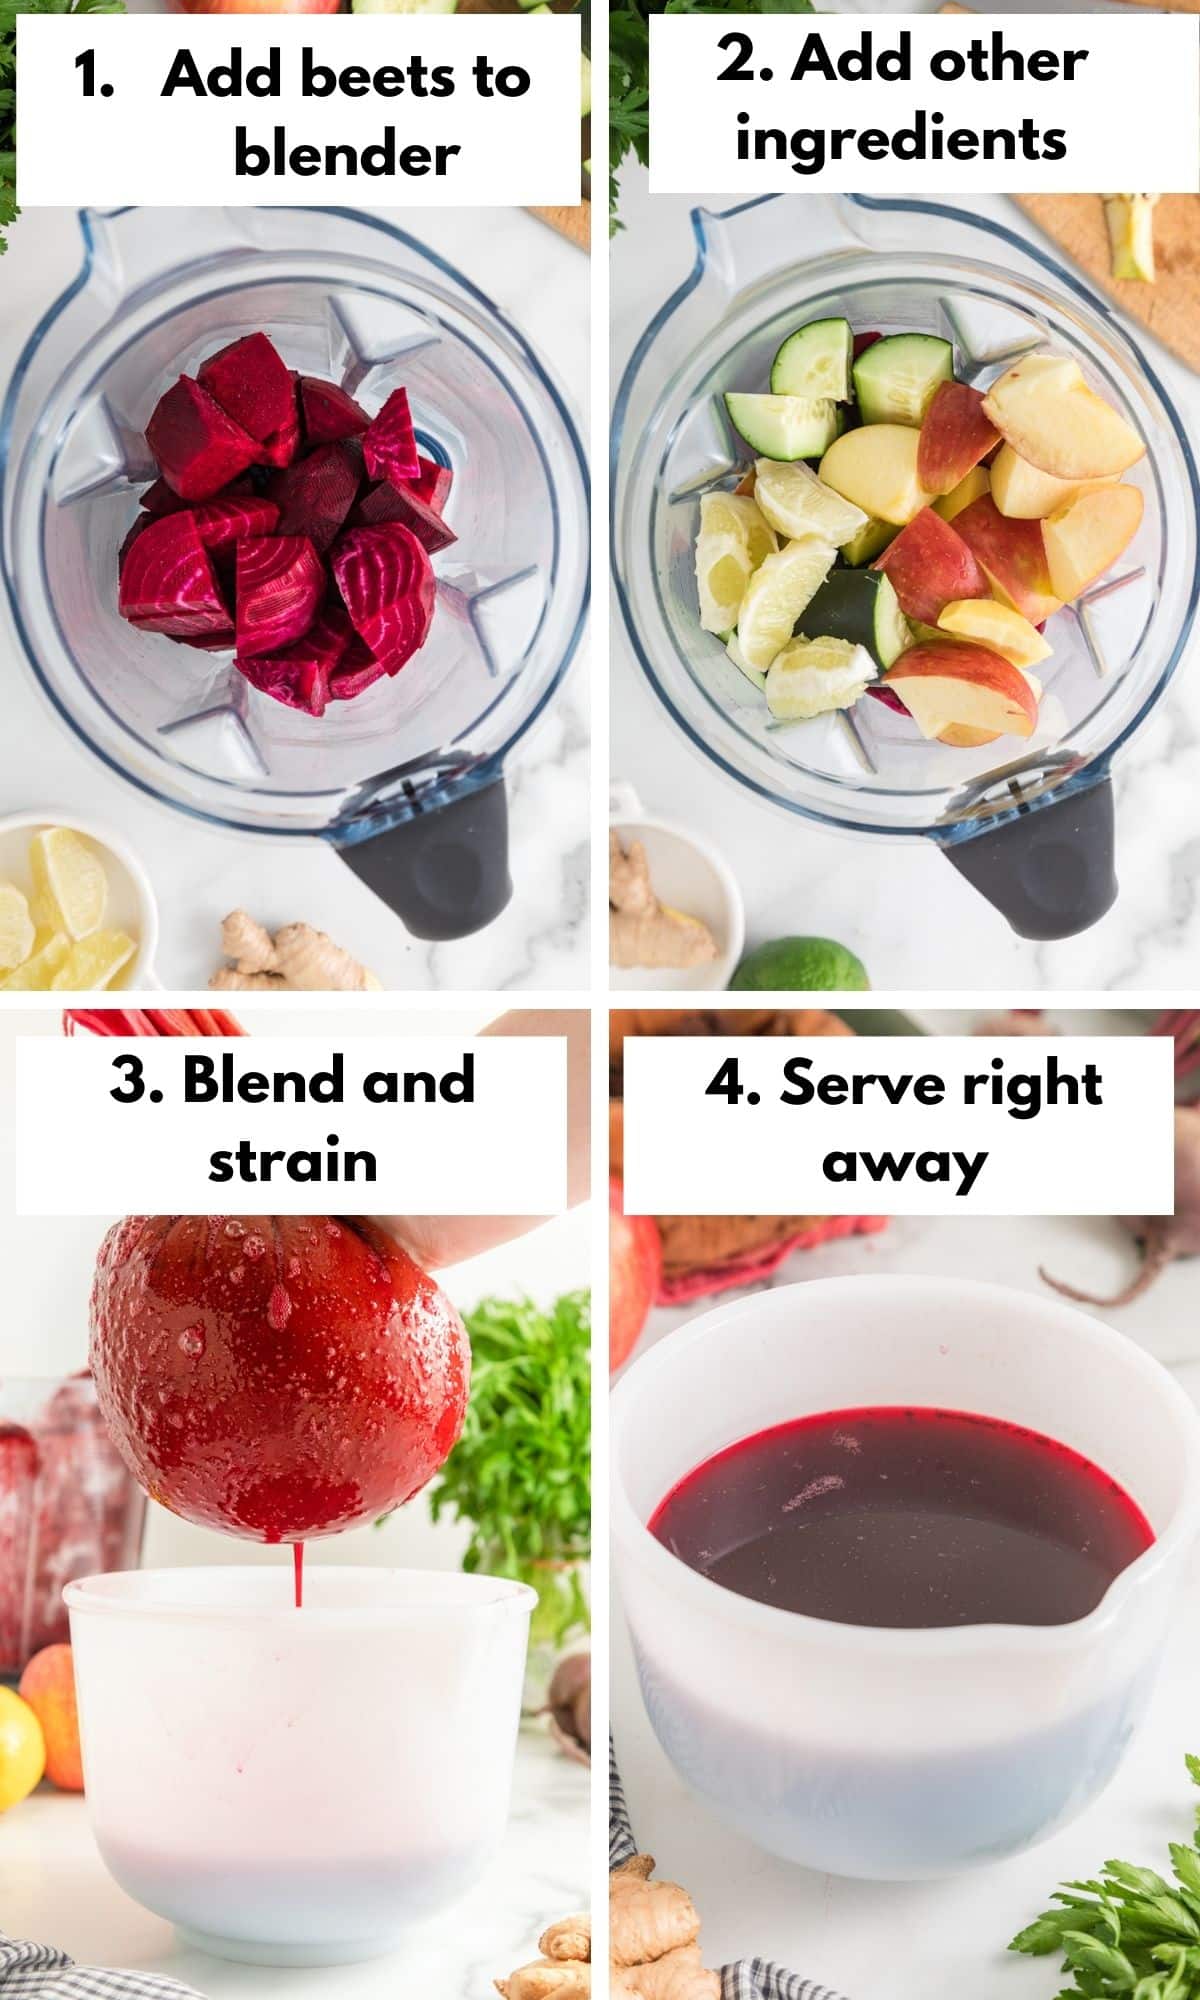 process photos for making beet juice in blender.